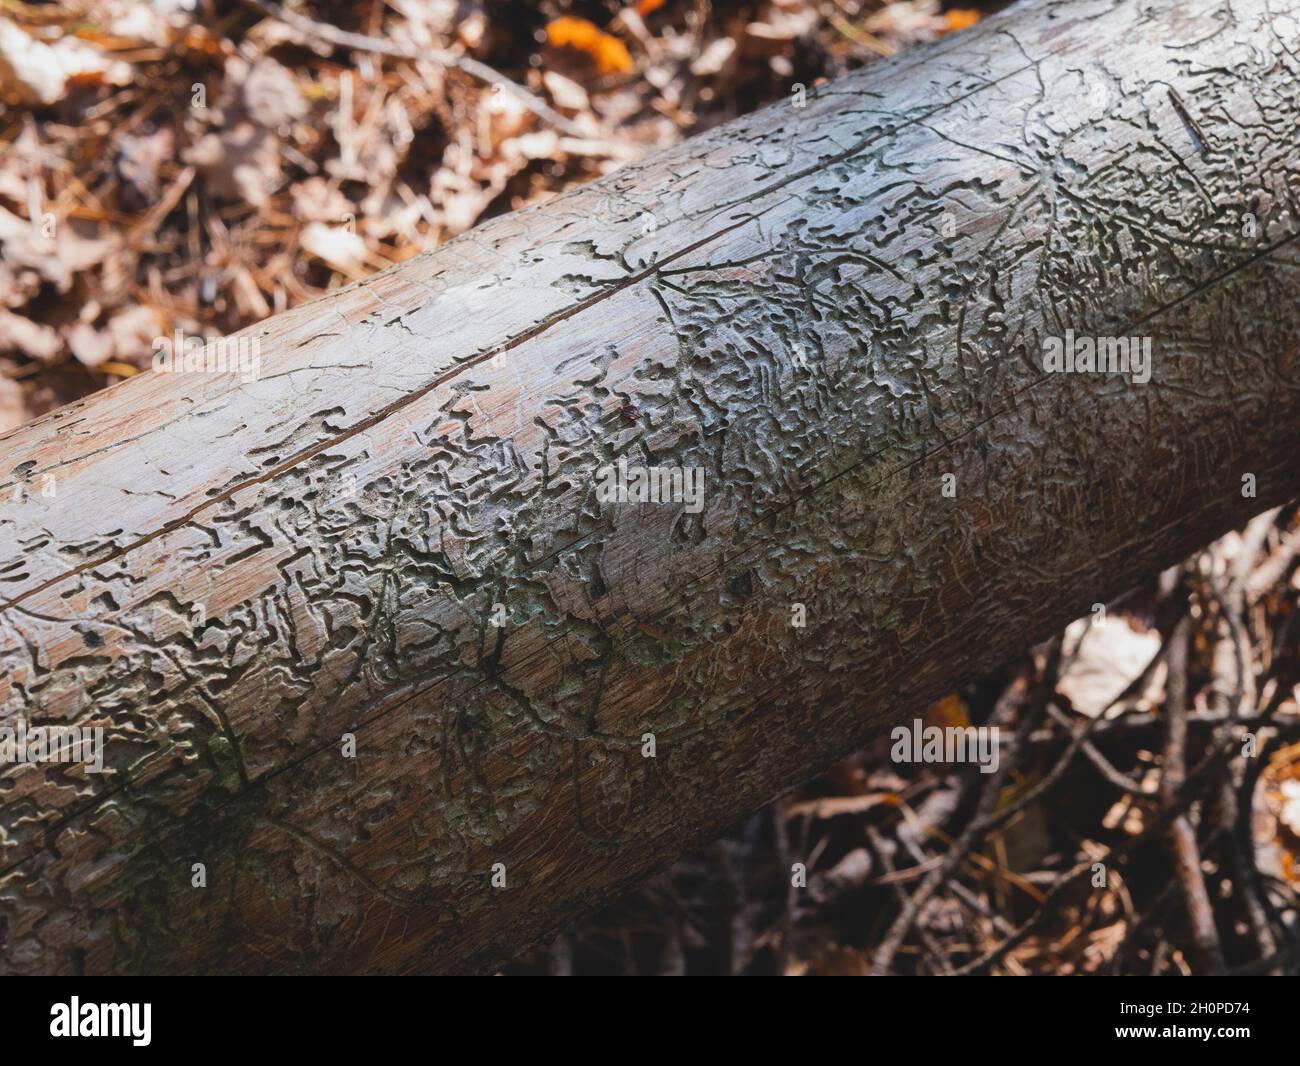 Bizarre bark beetle galleries on a dead tree. Pest damage. Tracery created by larvae which lived in the tree and fed on the living tissues below the b Stock Photo